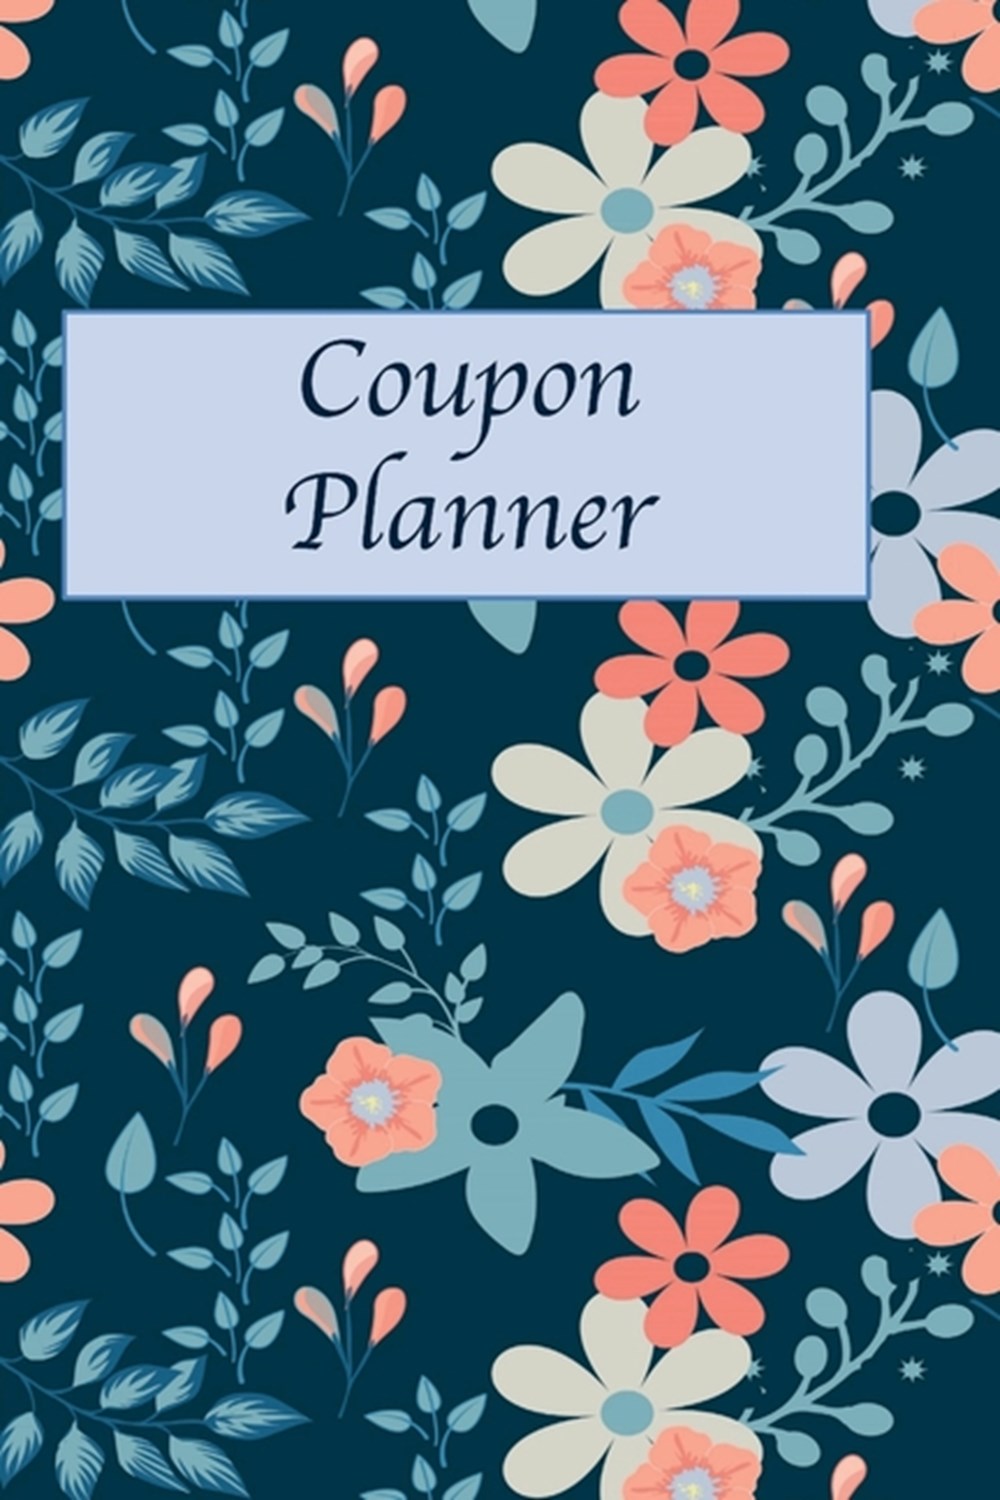 Coupon Planner Simple Shopping Planner For The Extreme Couponer In Your Life